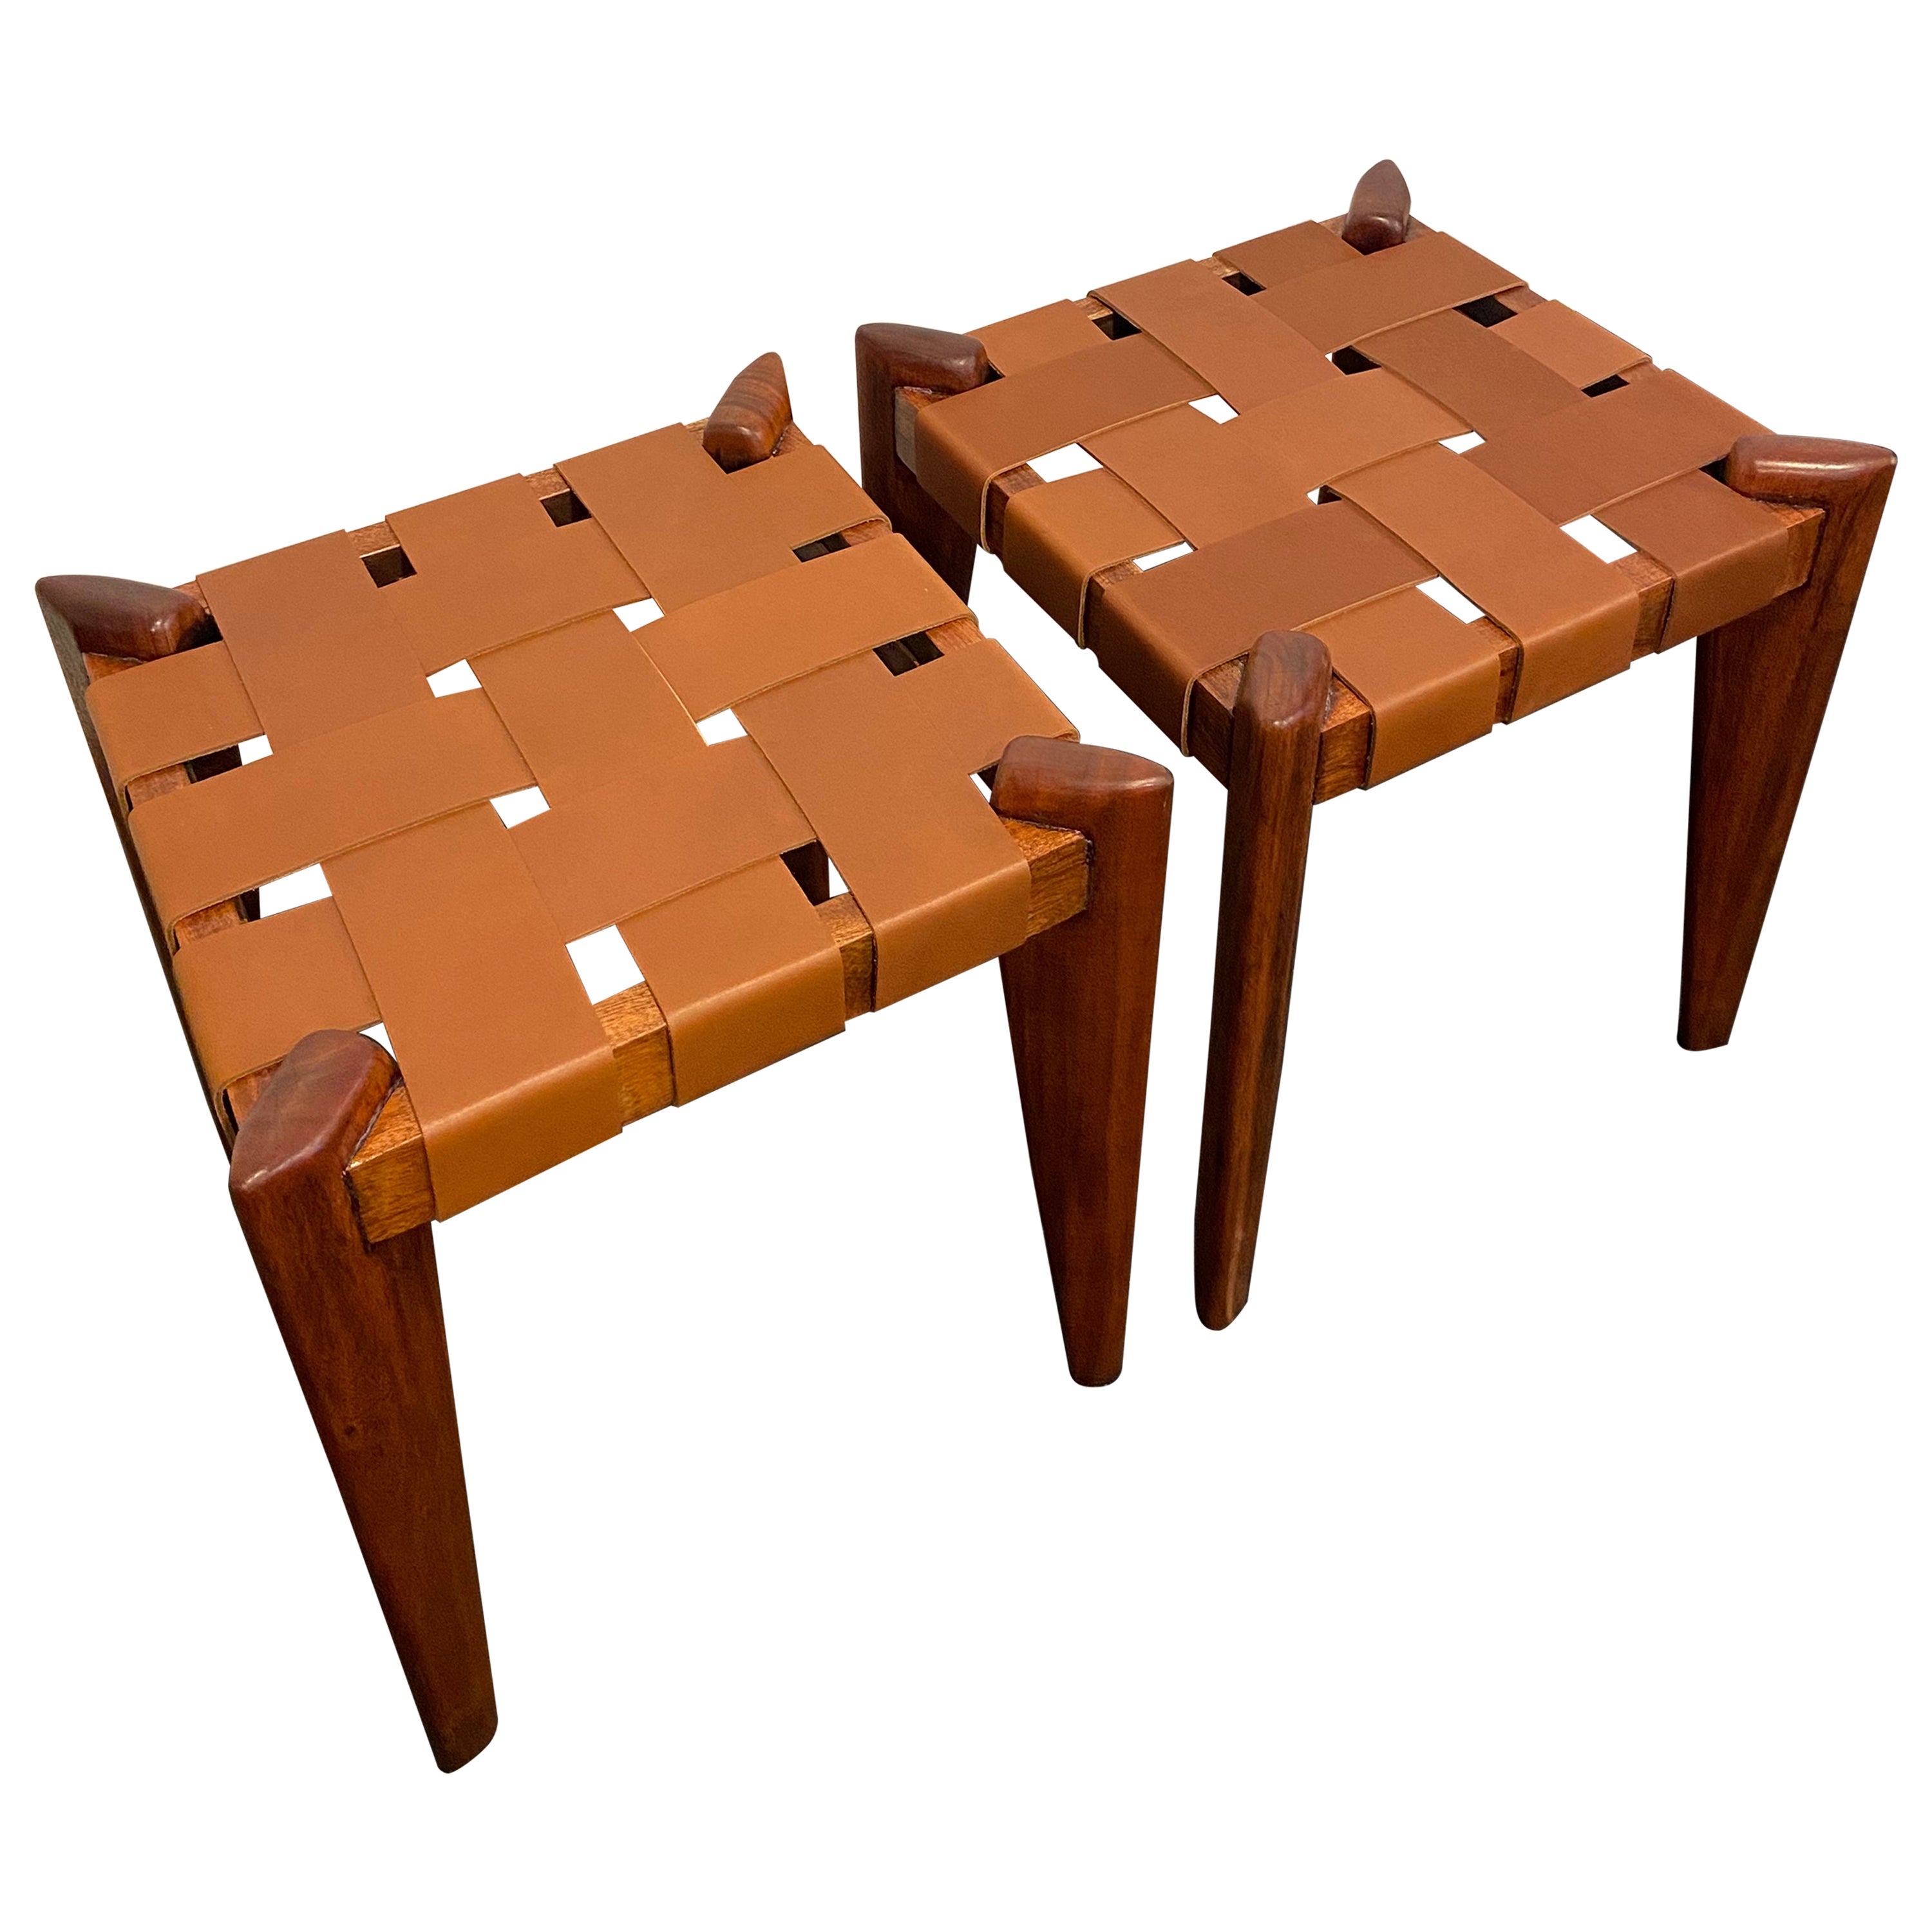 Edmond Spence Woven Leather Stools-a Pair